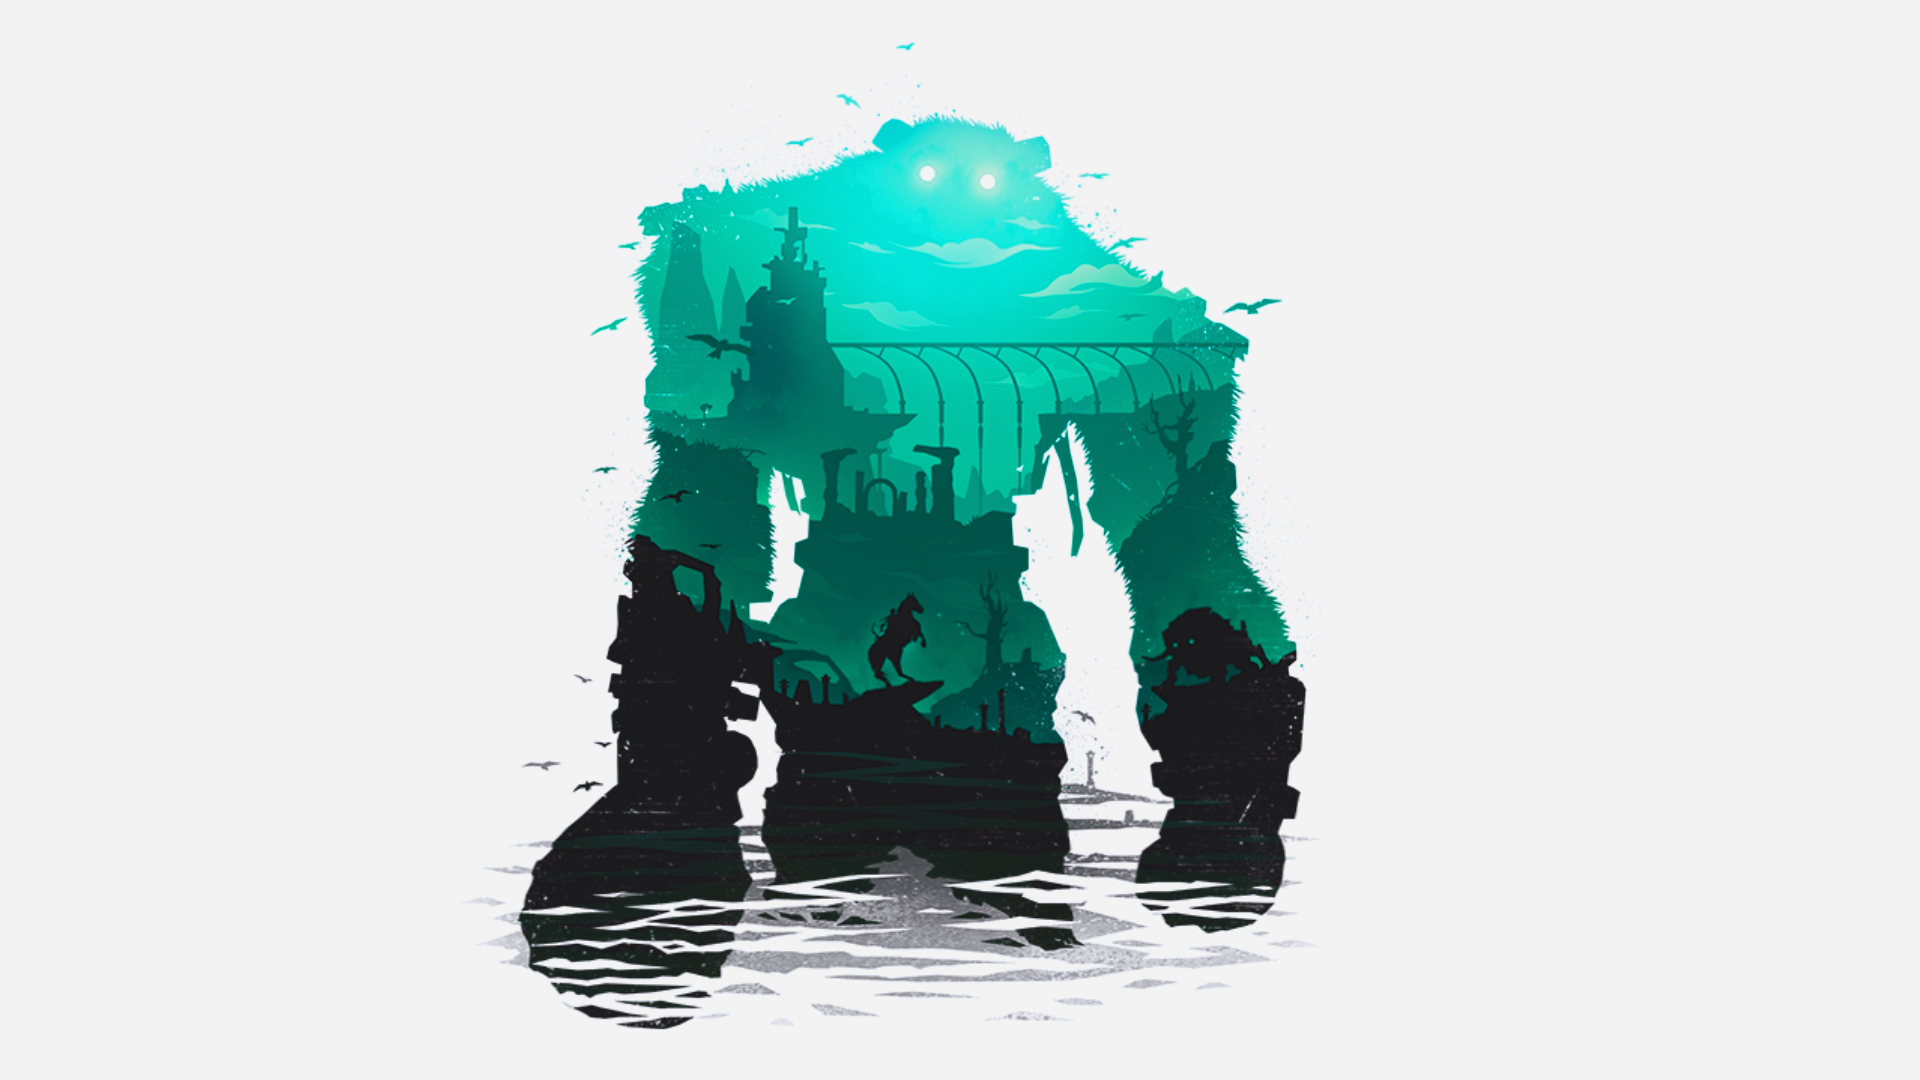 General 1920x1080 Shadow of the Colossus video games digital art turquoise cyan white background white